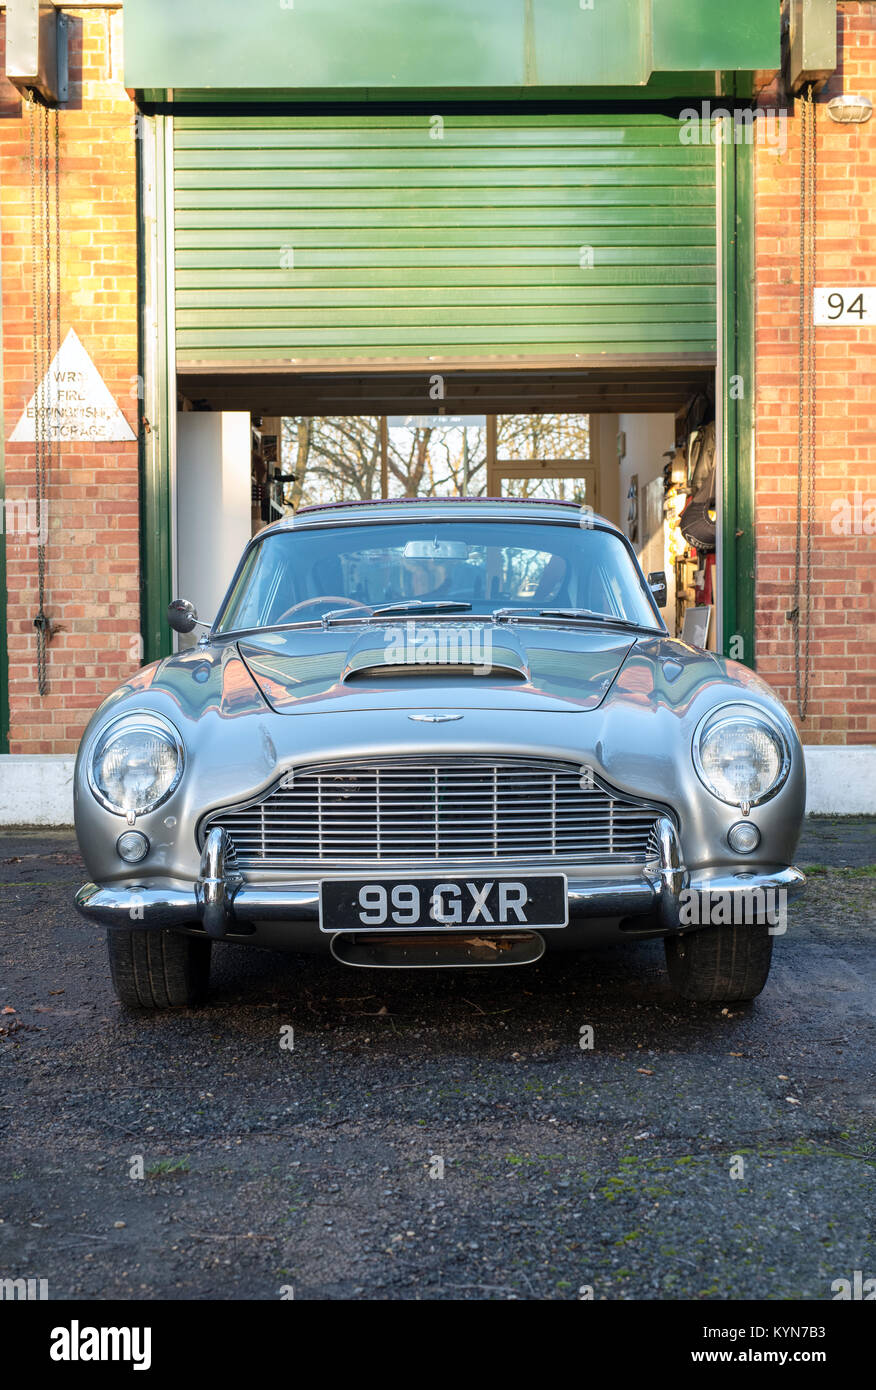 Aston Martin DB5 V8 car at Bicester heritage centre. Bicester, Oxfordshire, England Stock Photo